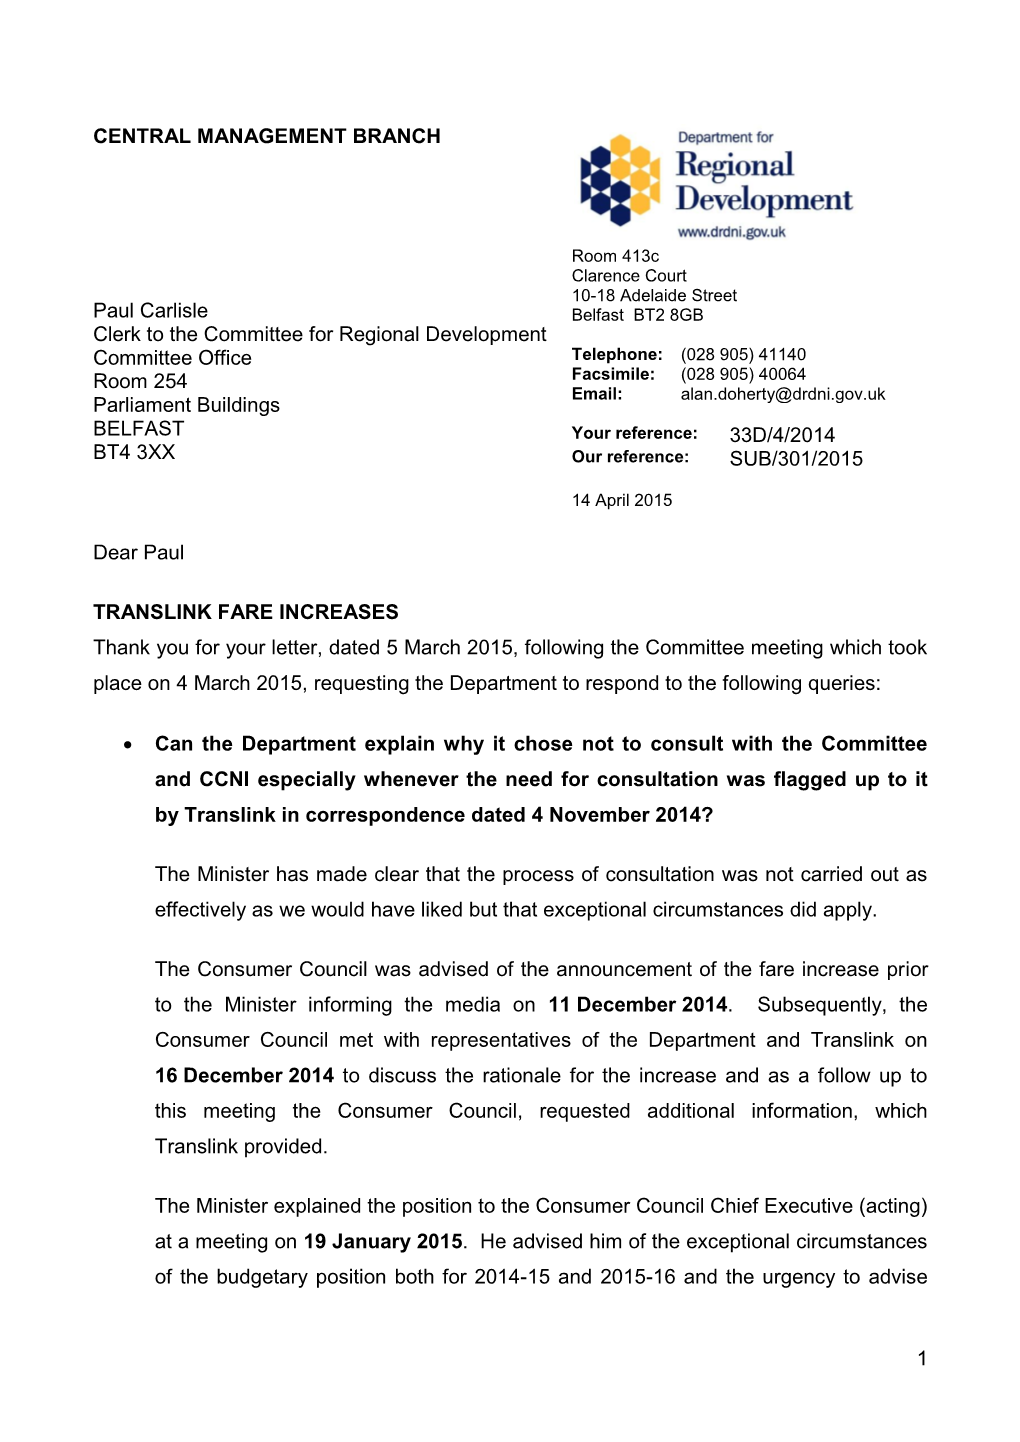 DRD Response to Queries on Translink Fare Increases